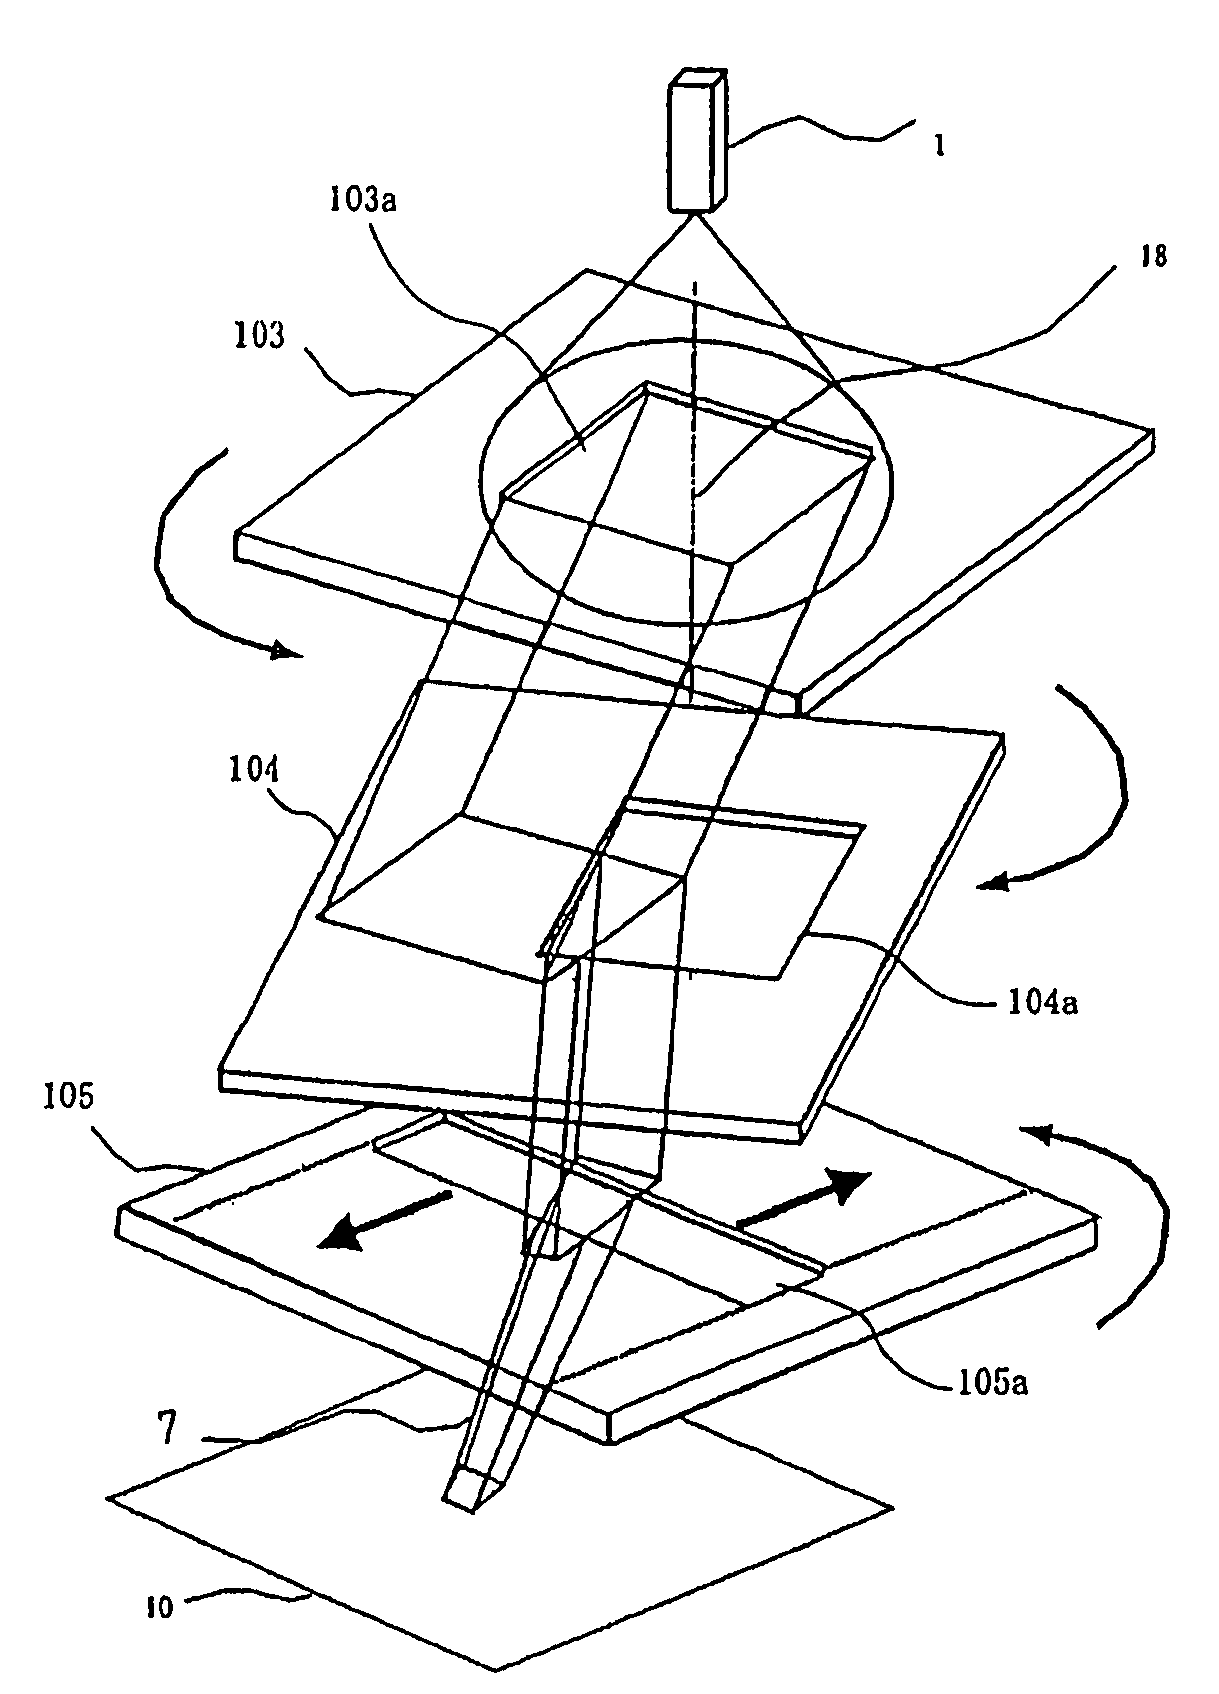 Variable shaped electron beam lithography system and method for manufacturing substrate